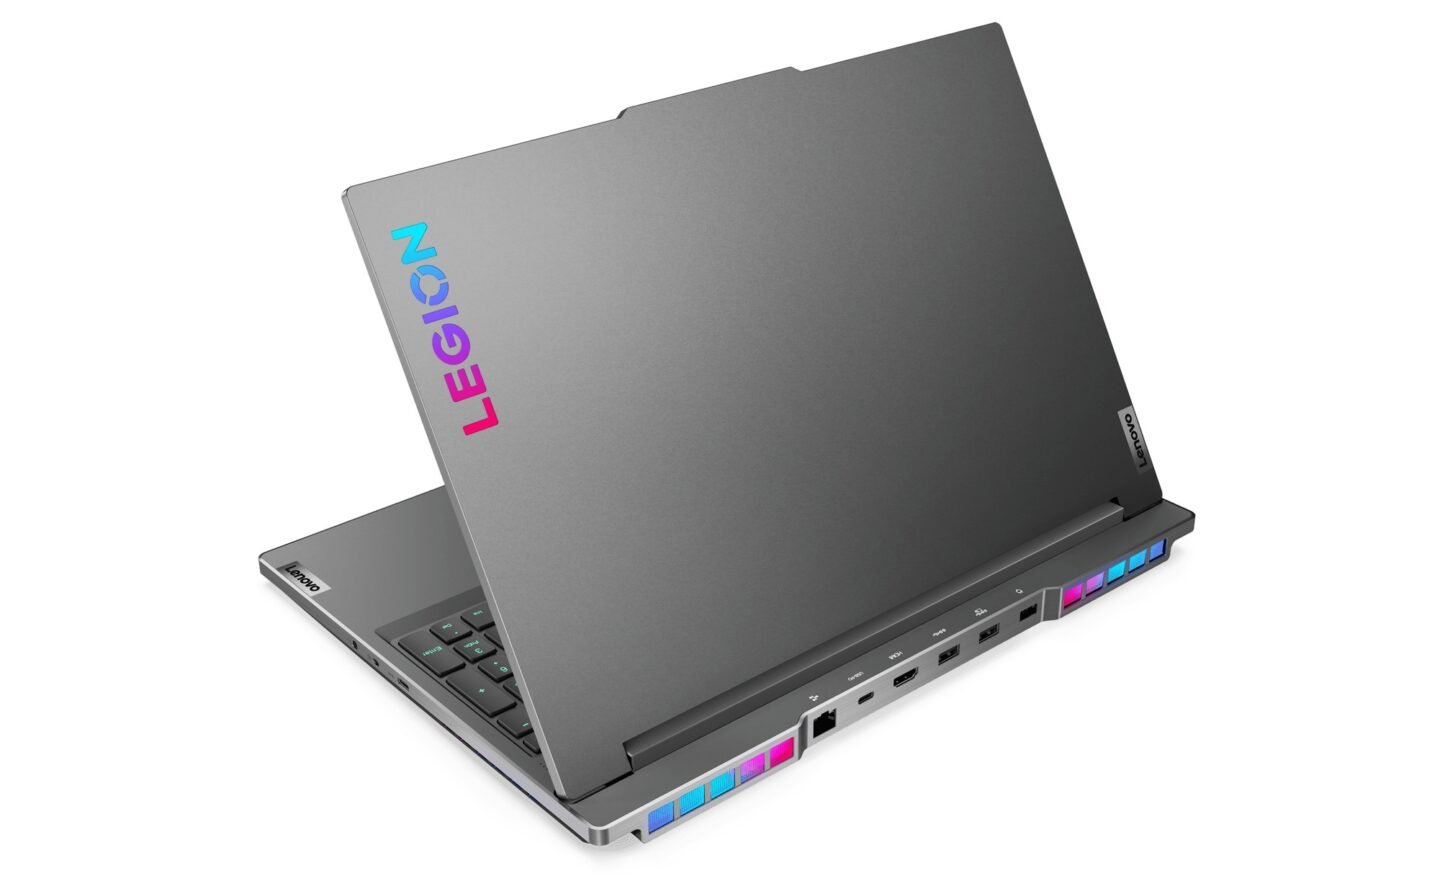 Lenovo has introduced powerful gaming laptops from the Legion brand